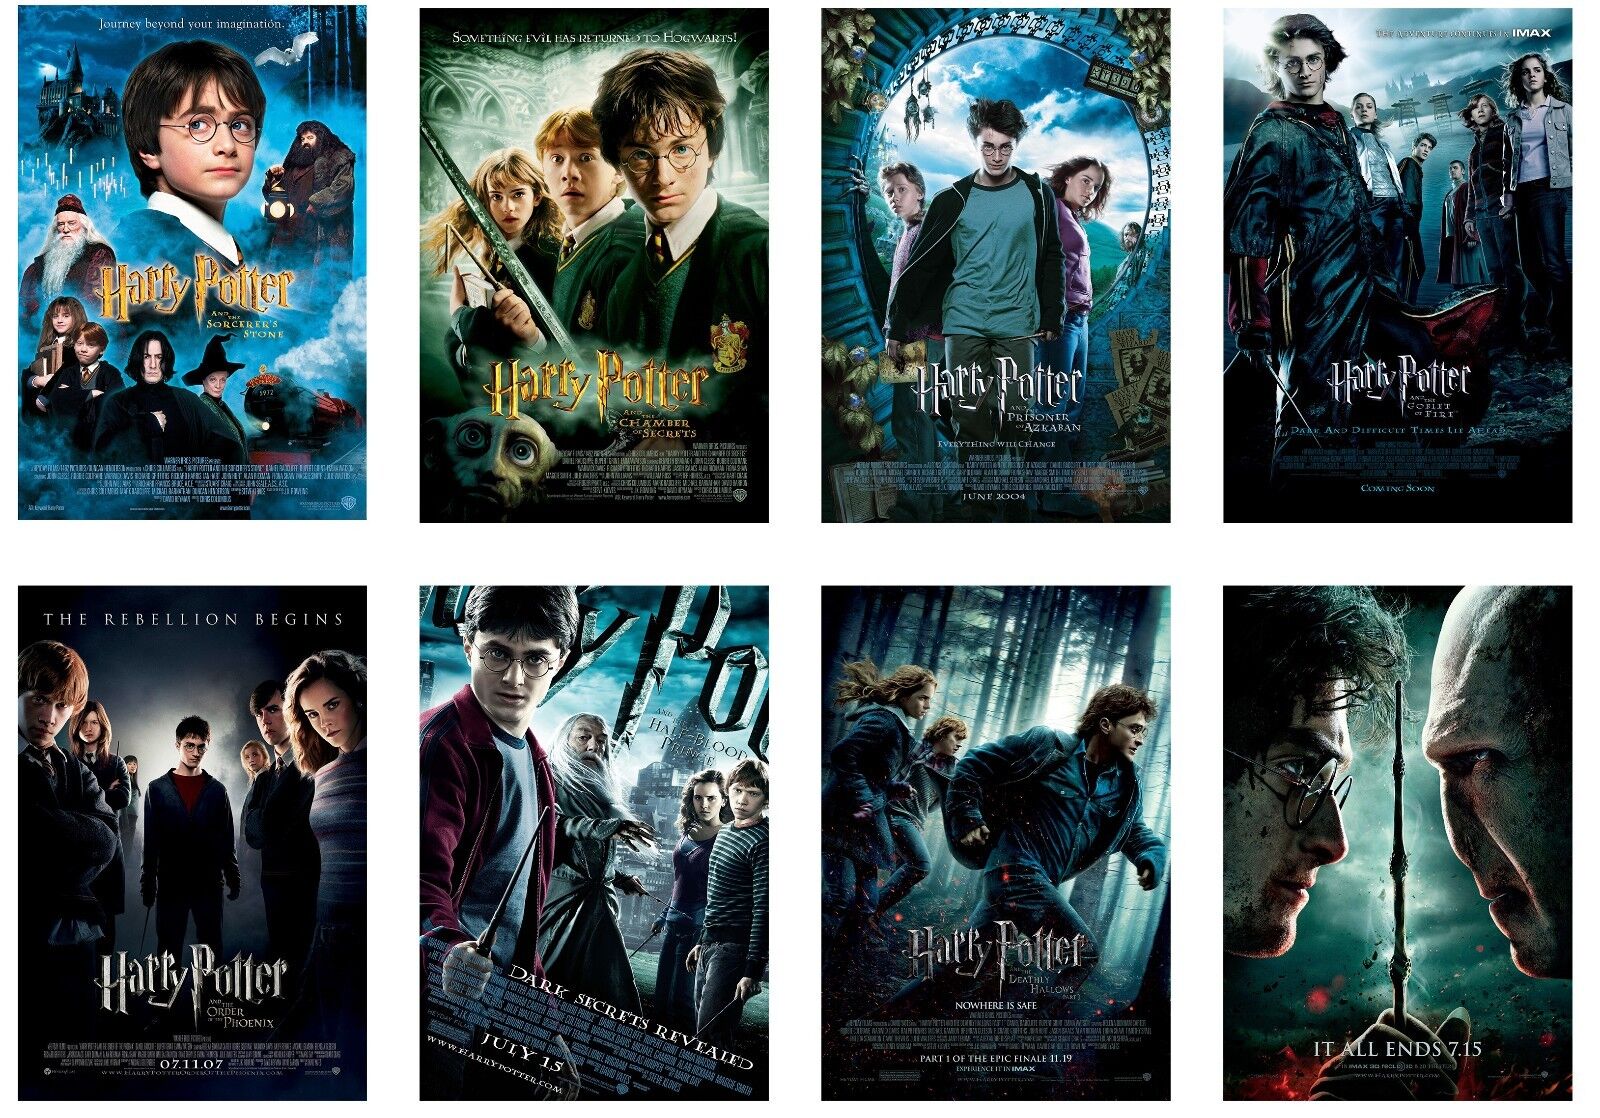 Harry Potter 1 to 8 Movie Posters Print in Sizes A0-A1-A2-A3-A4-A5-A6-MAXI  - C24